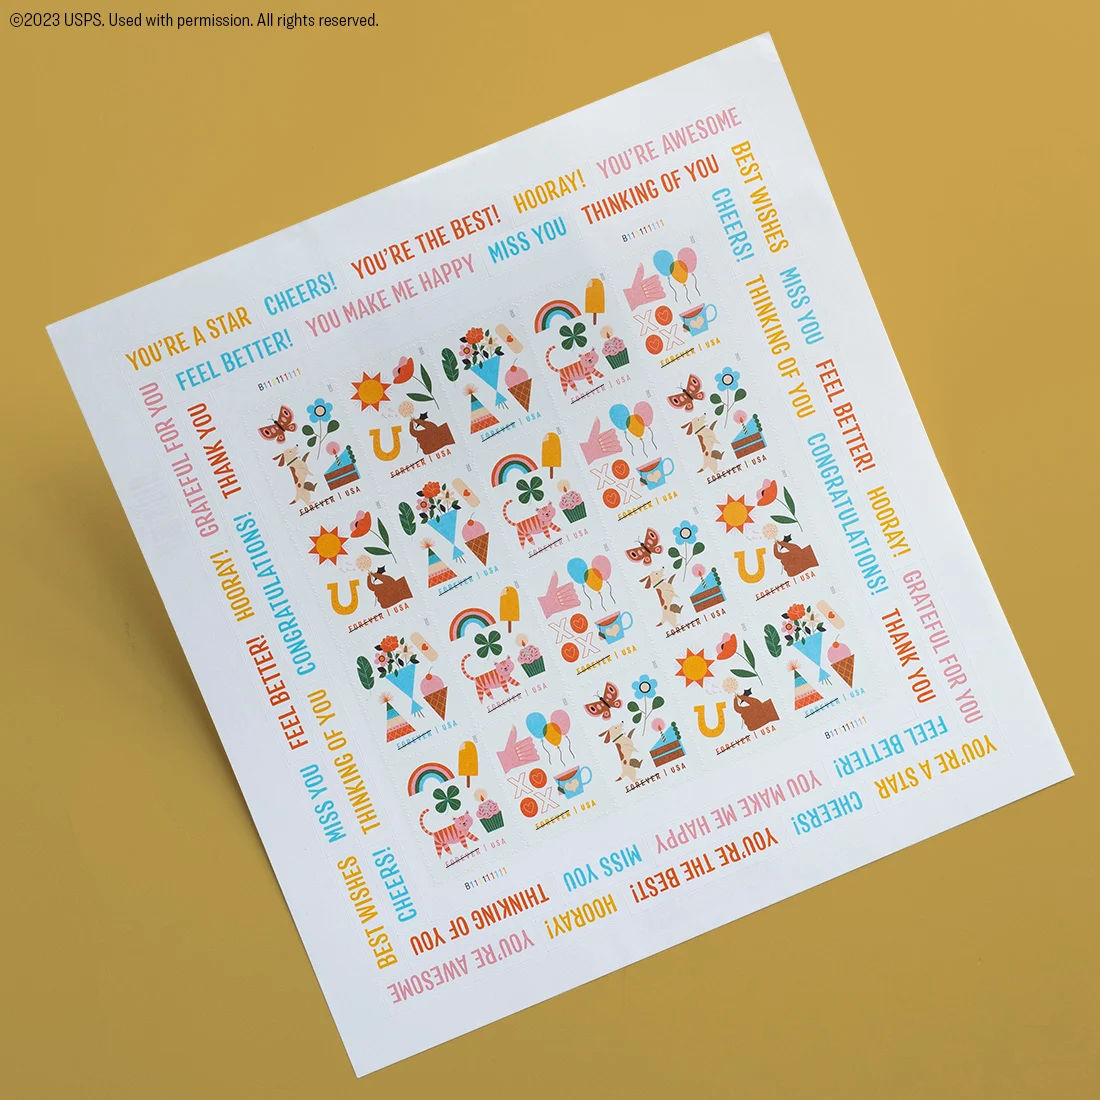 When You Wish Upon A Star Stamp Set – Social Paper Plan